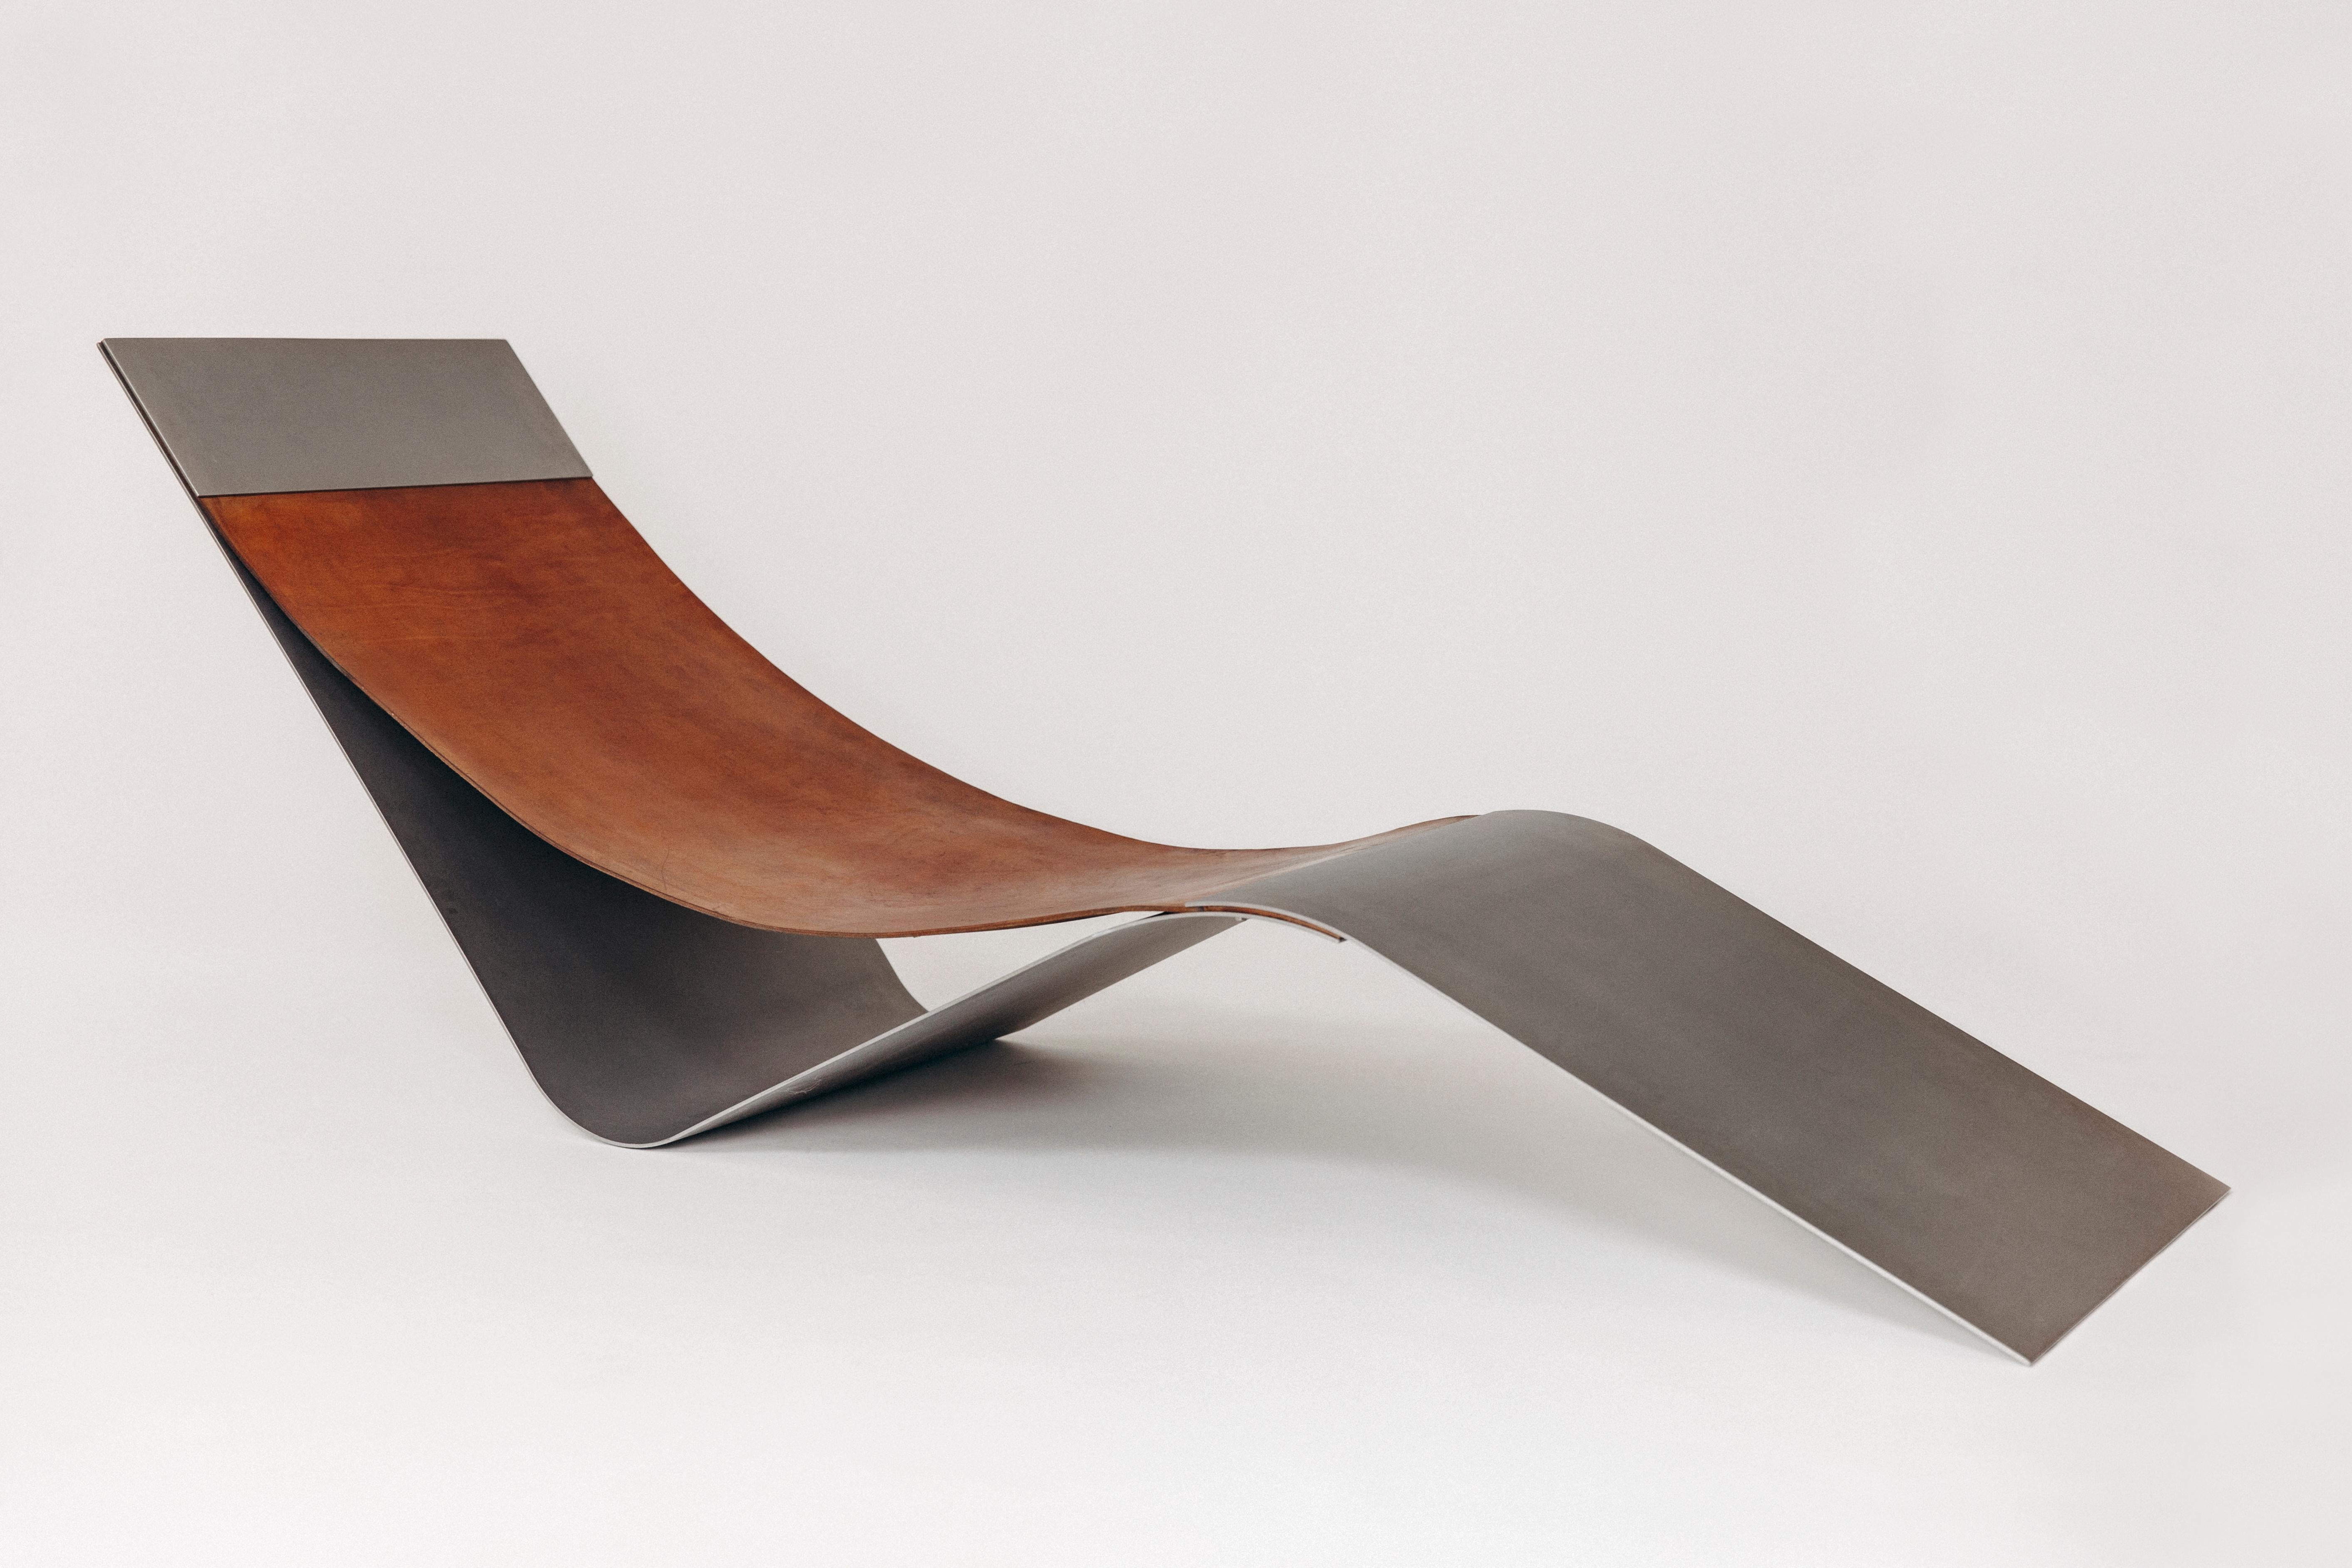 Chaise longue by Linde Hermans
Signed
Dimensions: 62,5 x 180 x 75 cm
Materials: Stainless steel and saddle leather (Both thickness 4 mm)
Different colors of leather possible.

